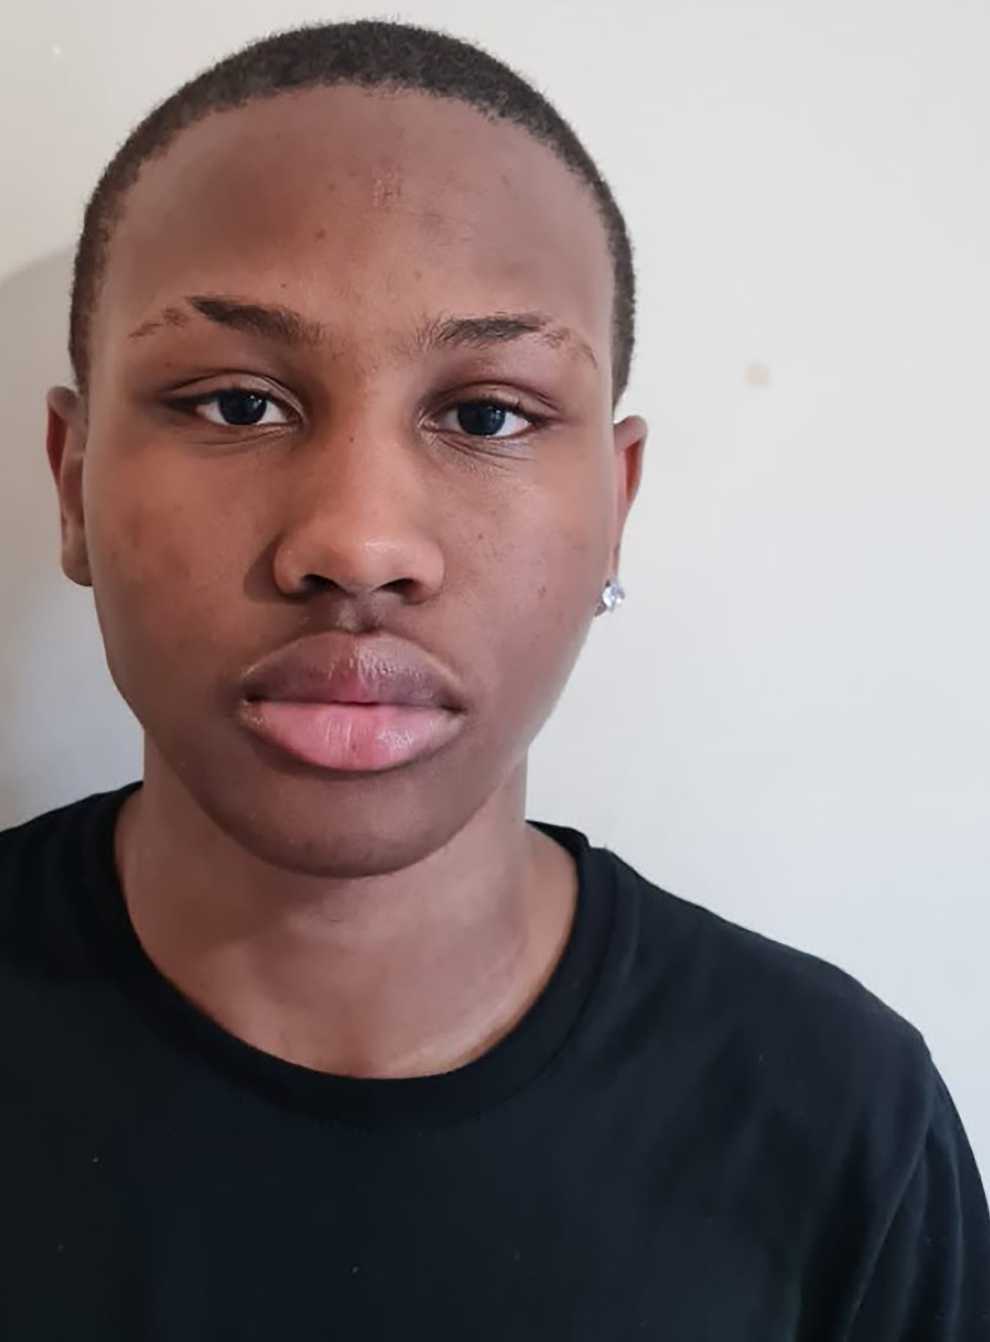 Teenager Deandre Thompson, 15, who travelled from London to Aberdeen, has been found safe and well, Police Scotland confirmed. (Police Scotland handout/PA)